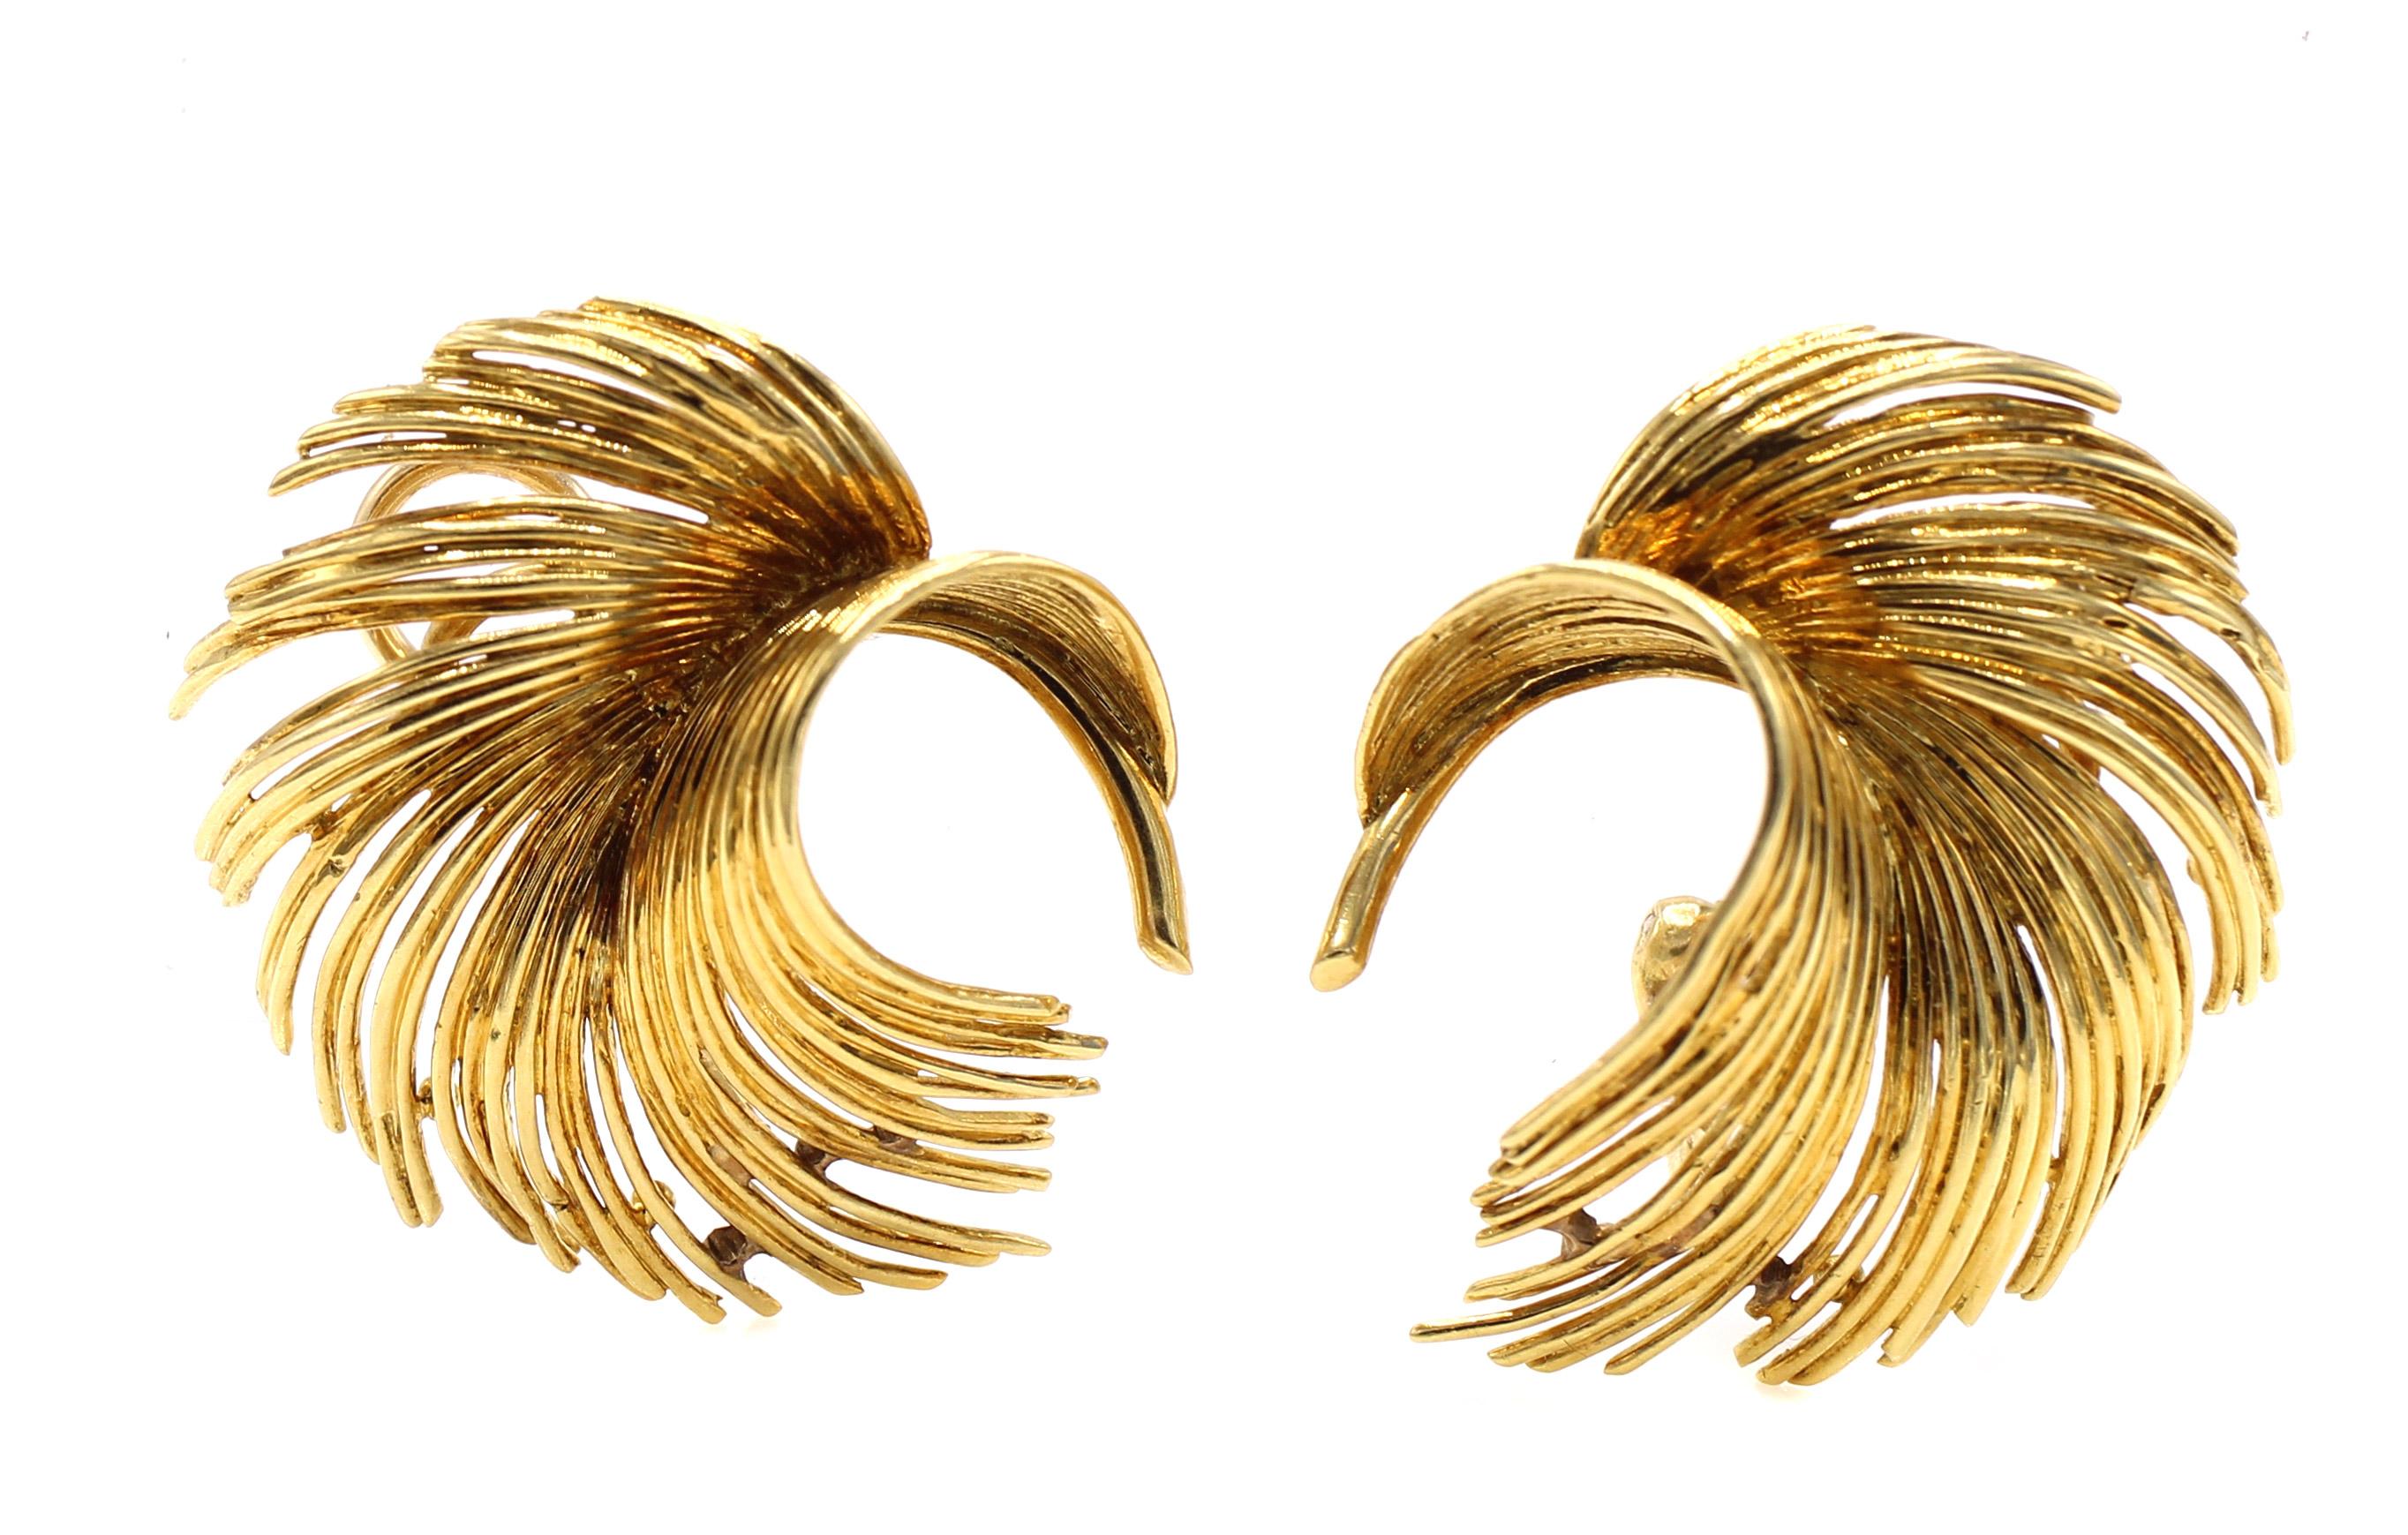 Beautifully designed and masterfully handcrafted in 18 karat yellow gold 1980s ear clips. Polished fine gold tubes assembled at various lengths with a curvature bring a true three-dimensional look to these lovely ear clips resembling feathers.